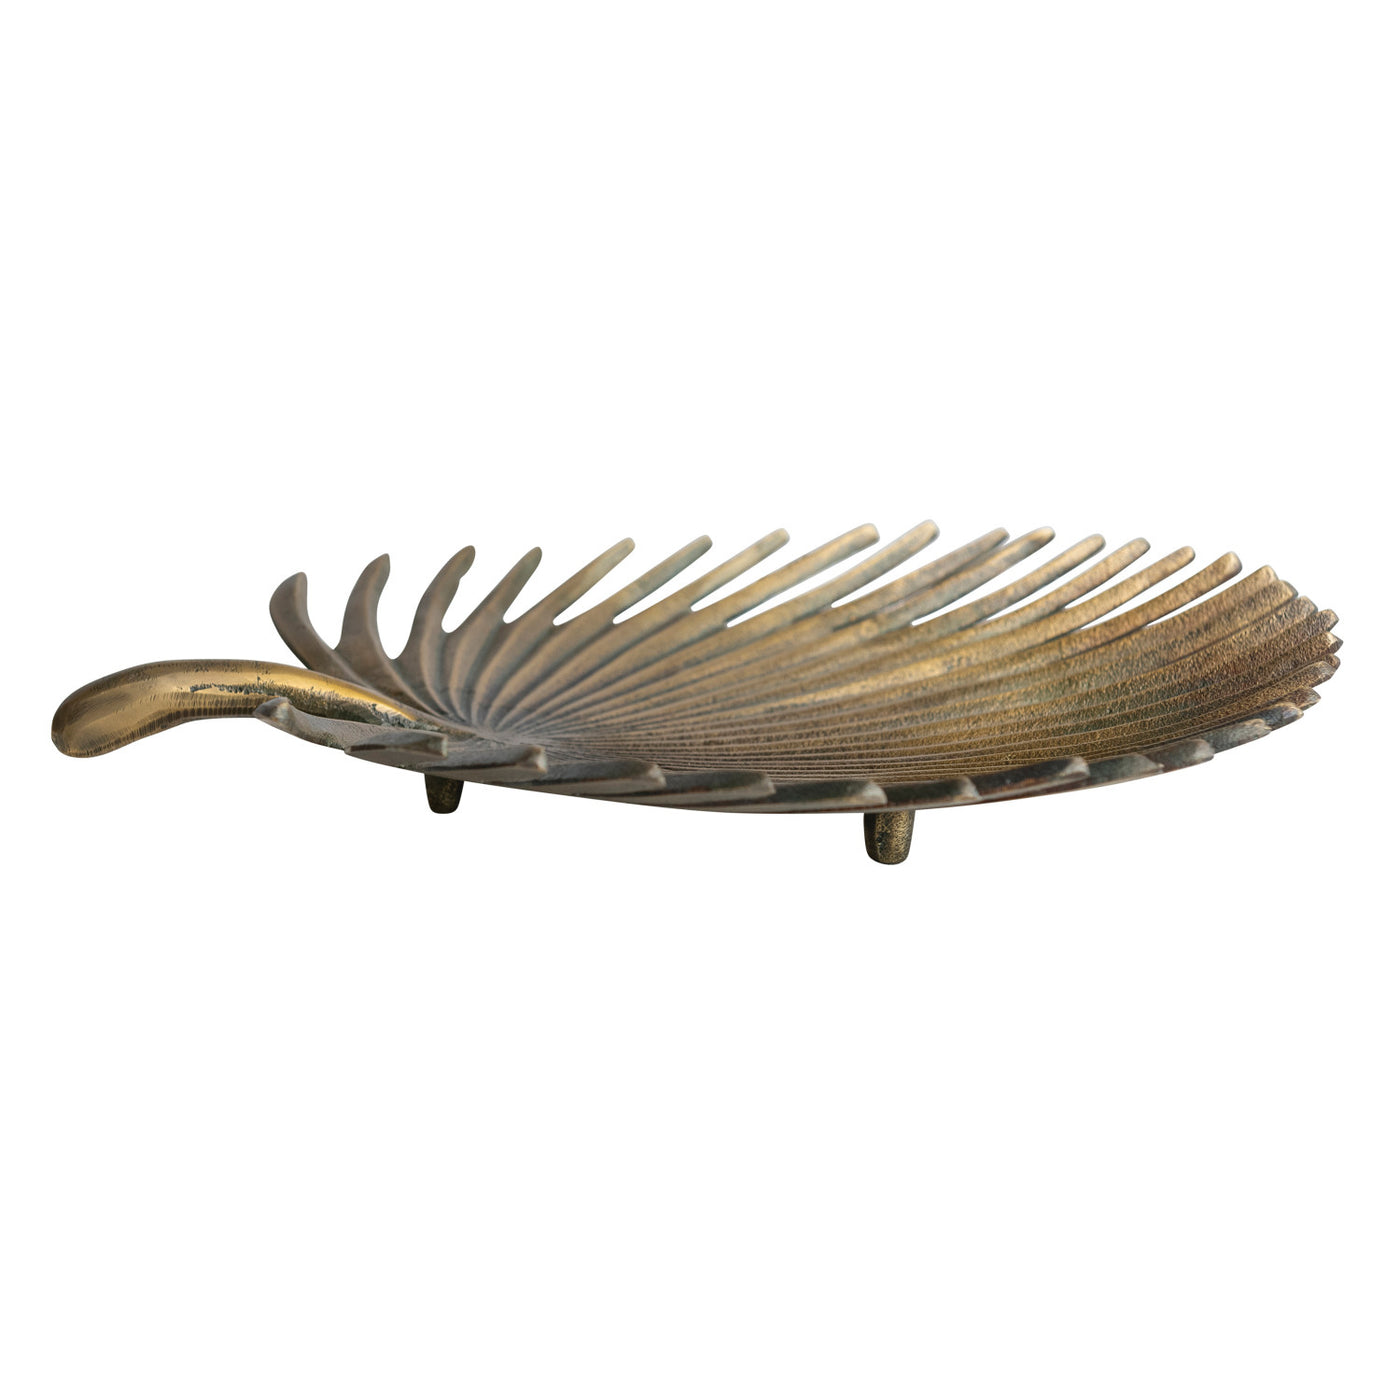 Cast Aluminum Palm Frond Tray, Antique Brass Finish